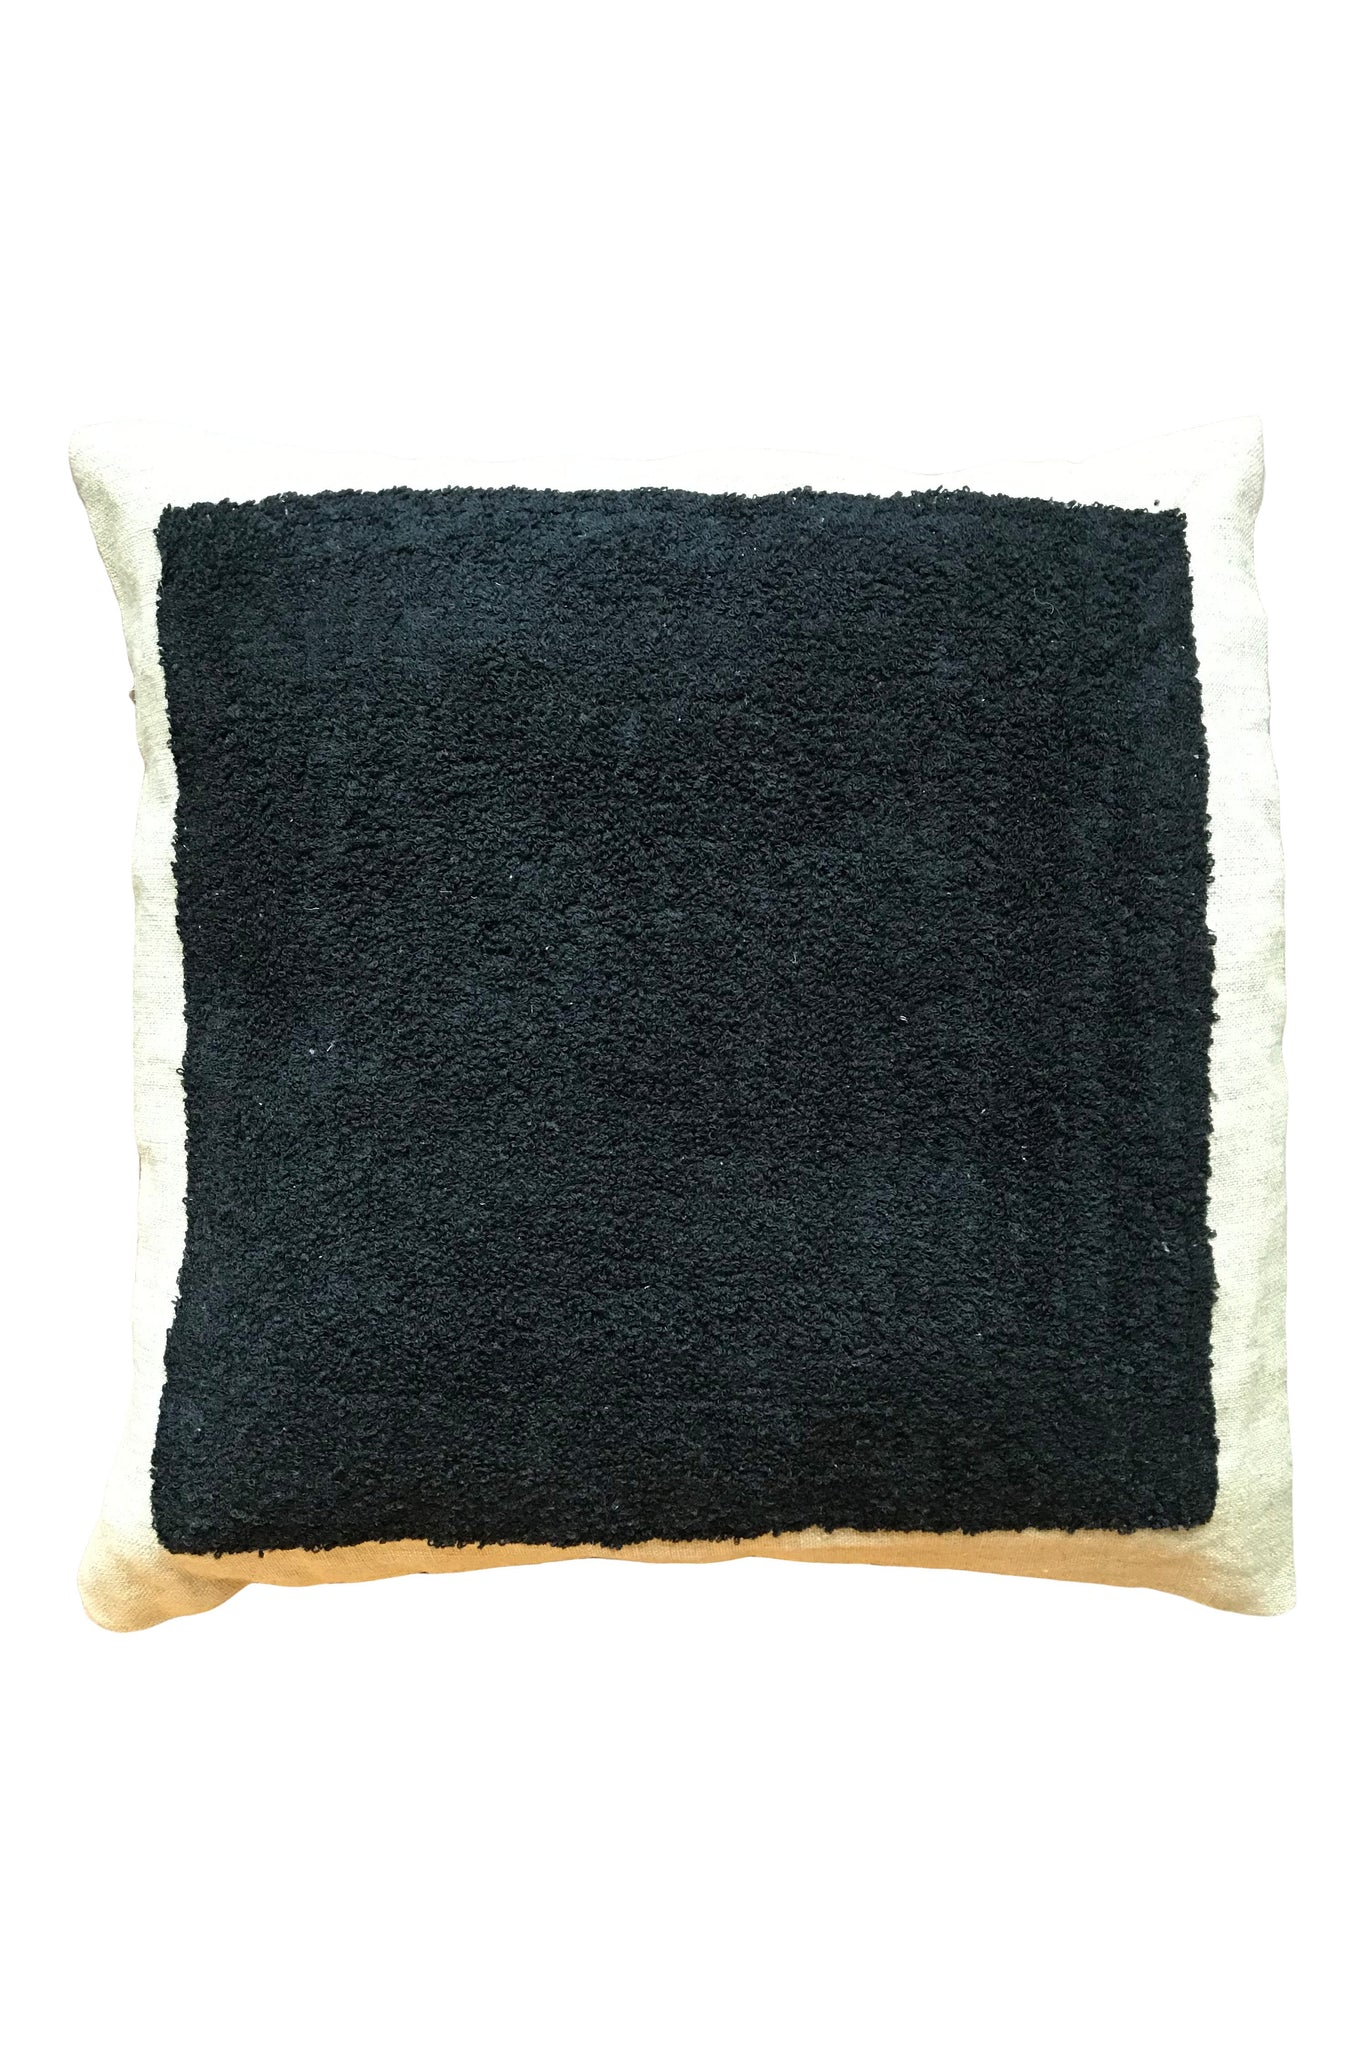 Black square embroidered cushion